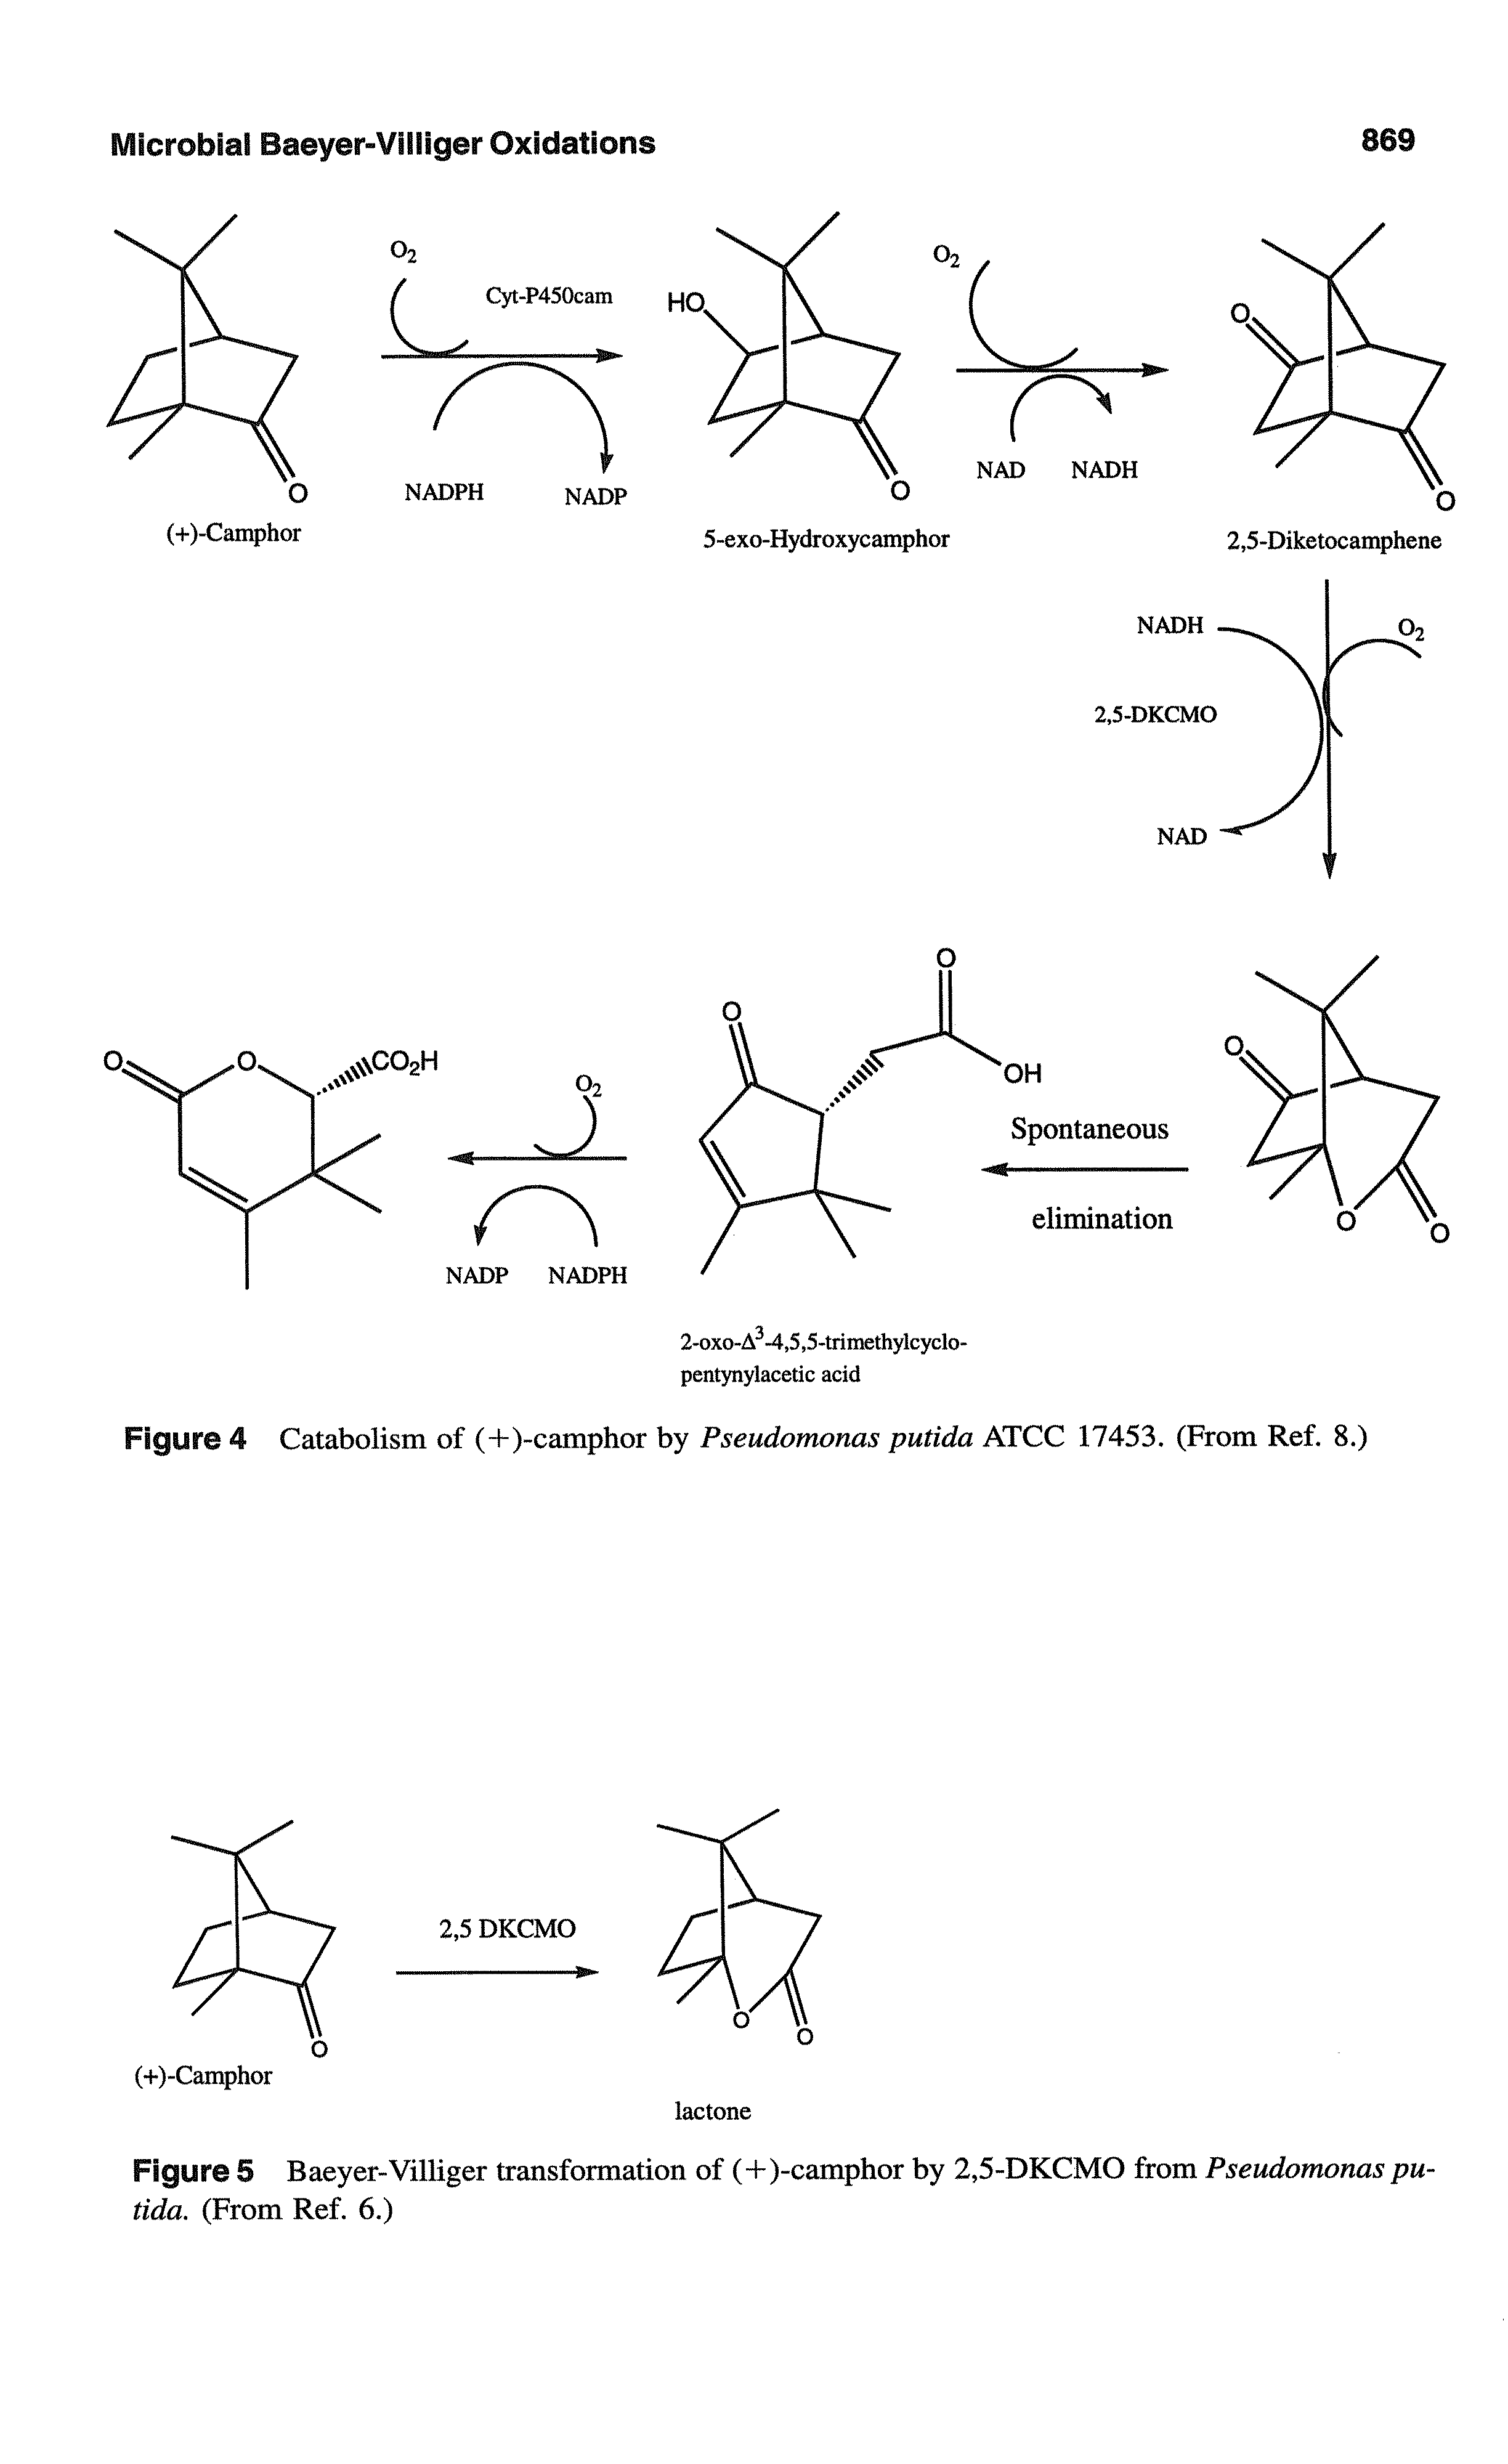 Figure 5 Baeyer-Villiger transformation of (H-)-camphor by 2,5-DKCMO from Pseudomonas putida. (From Ref. 6.)...